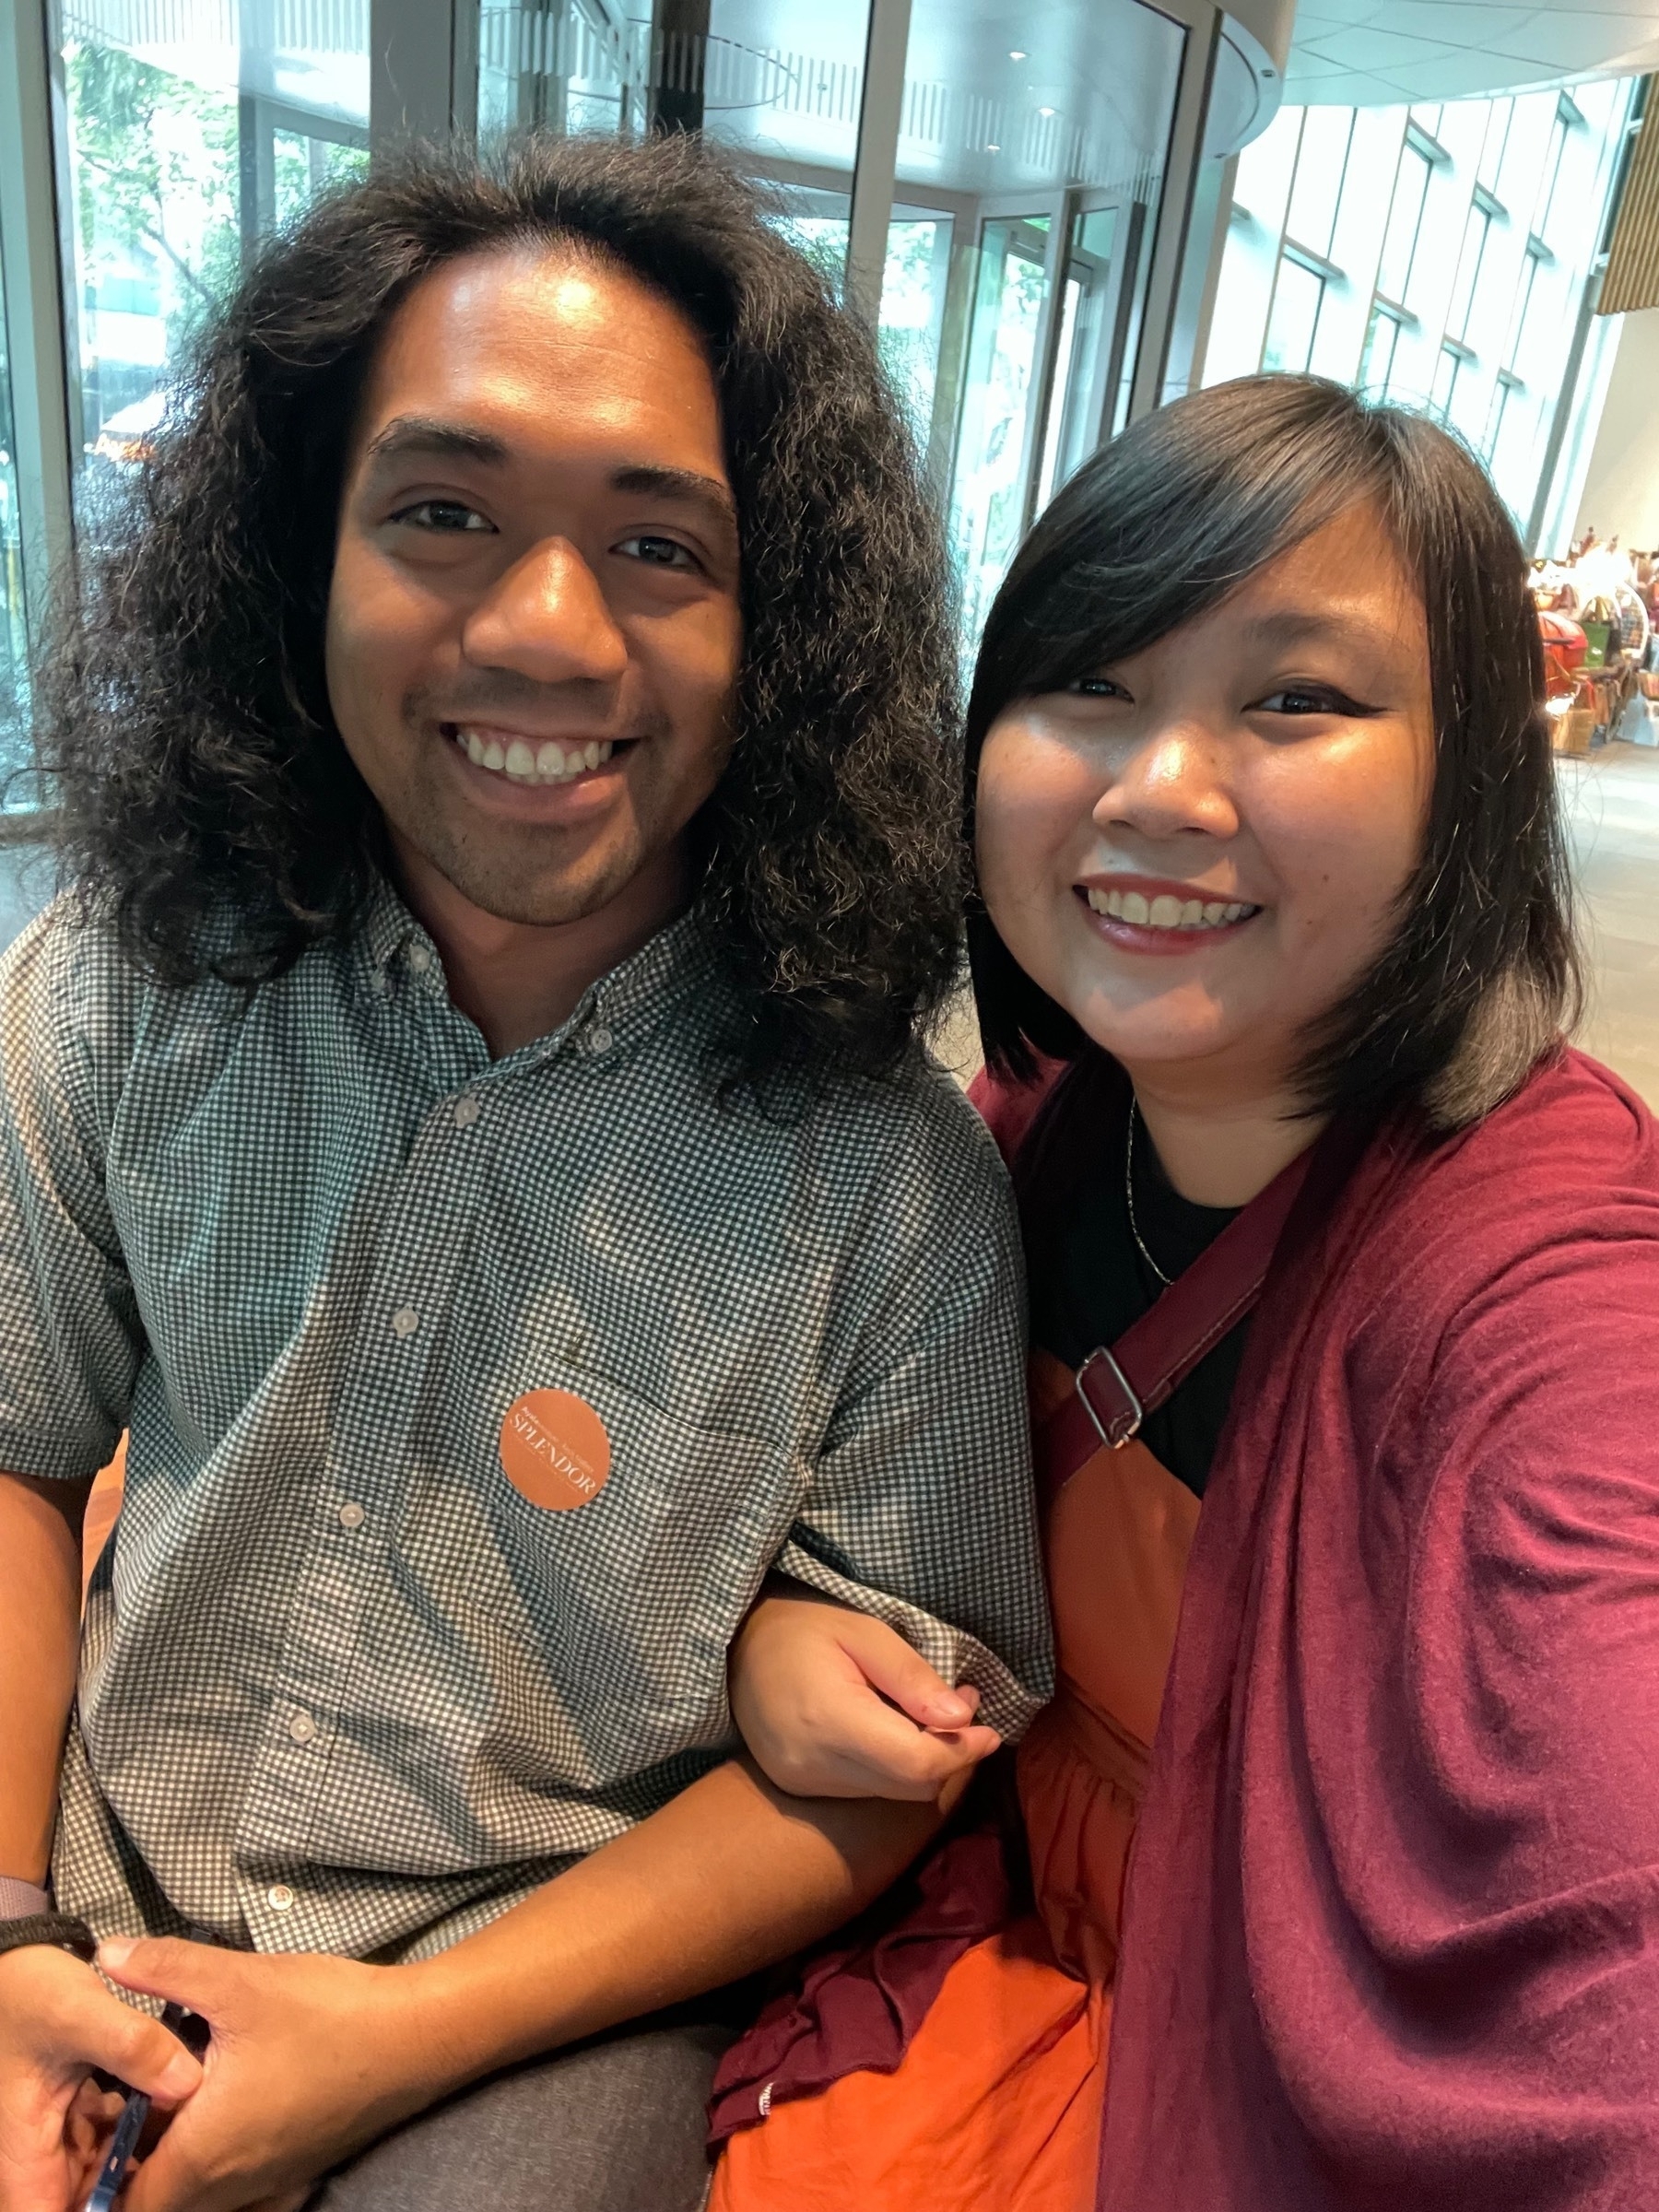 Selfie of Chi and Richard, her boyfriend, together at the lobby of Ayala Museum for a date. Richard has a "SPLENDOR" orange sticker on his right chest pocket, which is the museum's way of identifying visitors for the Splendor exhibit. Chi's hand is wrapped around Richard's, with her other hand off camera, holding the phone to take the photo.